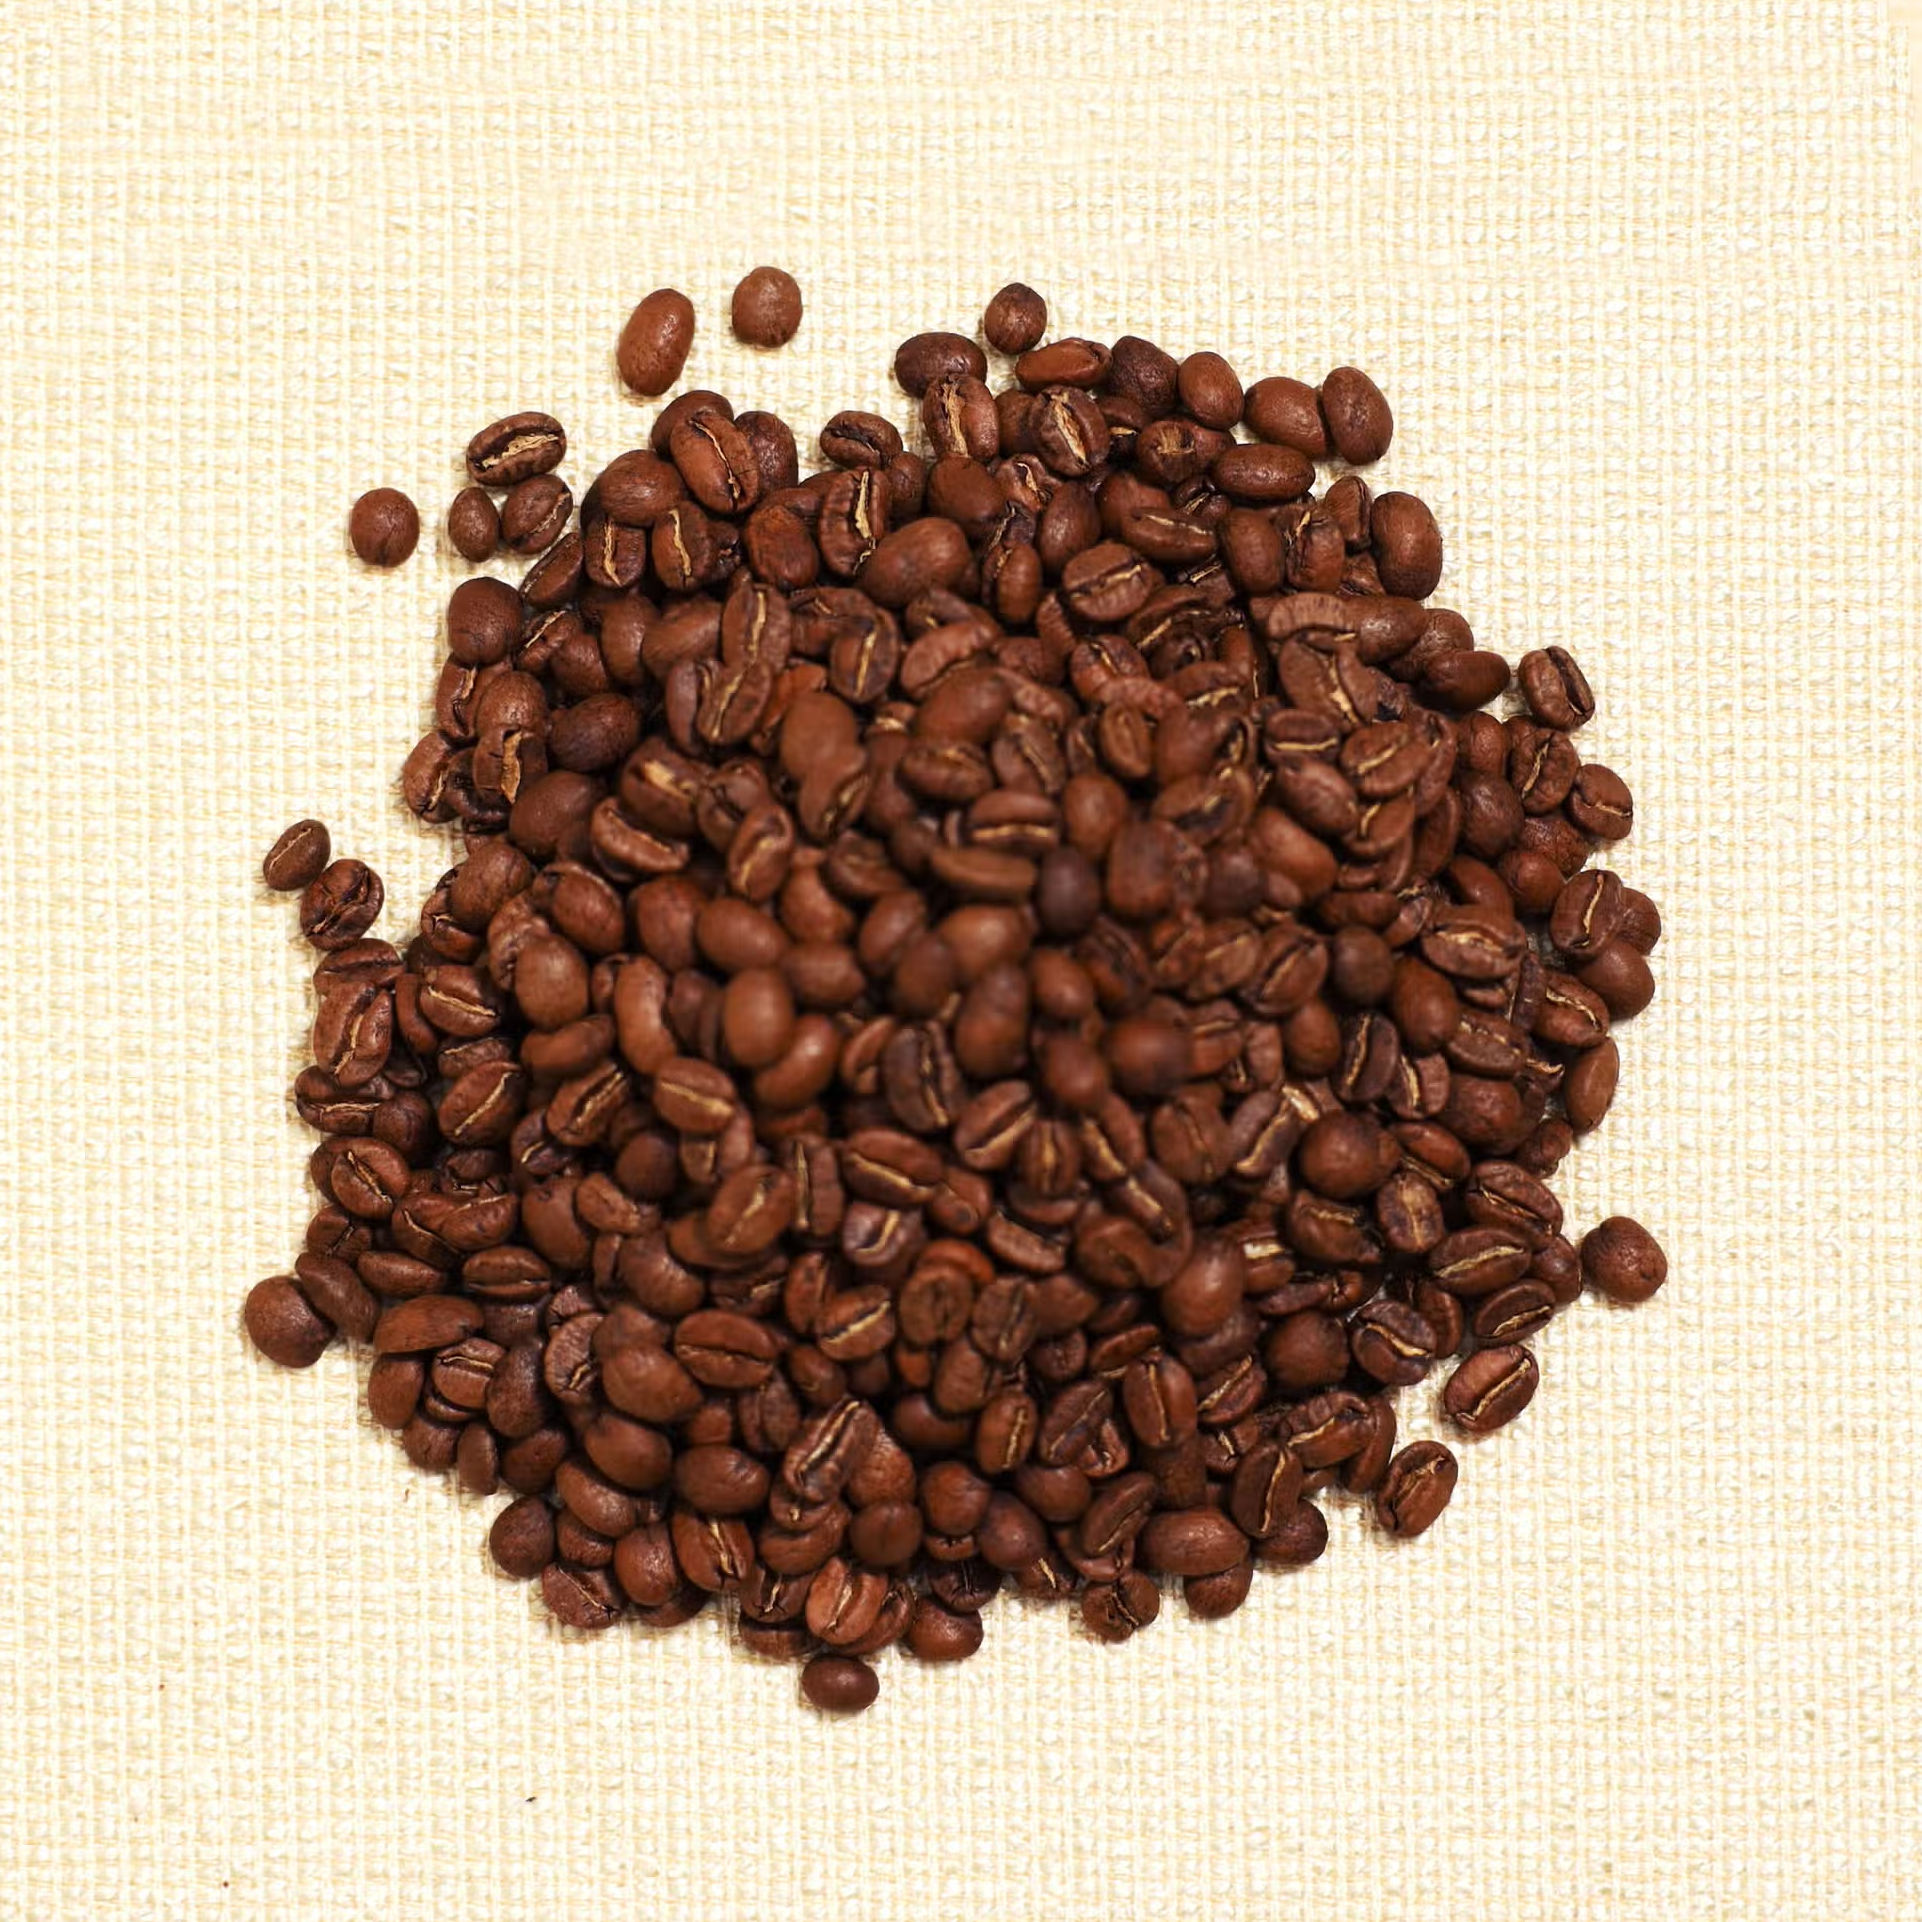 roasted coffee beans on yellow cloth